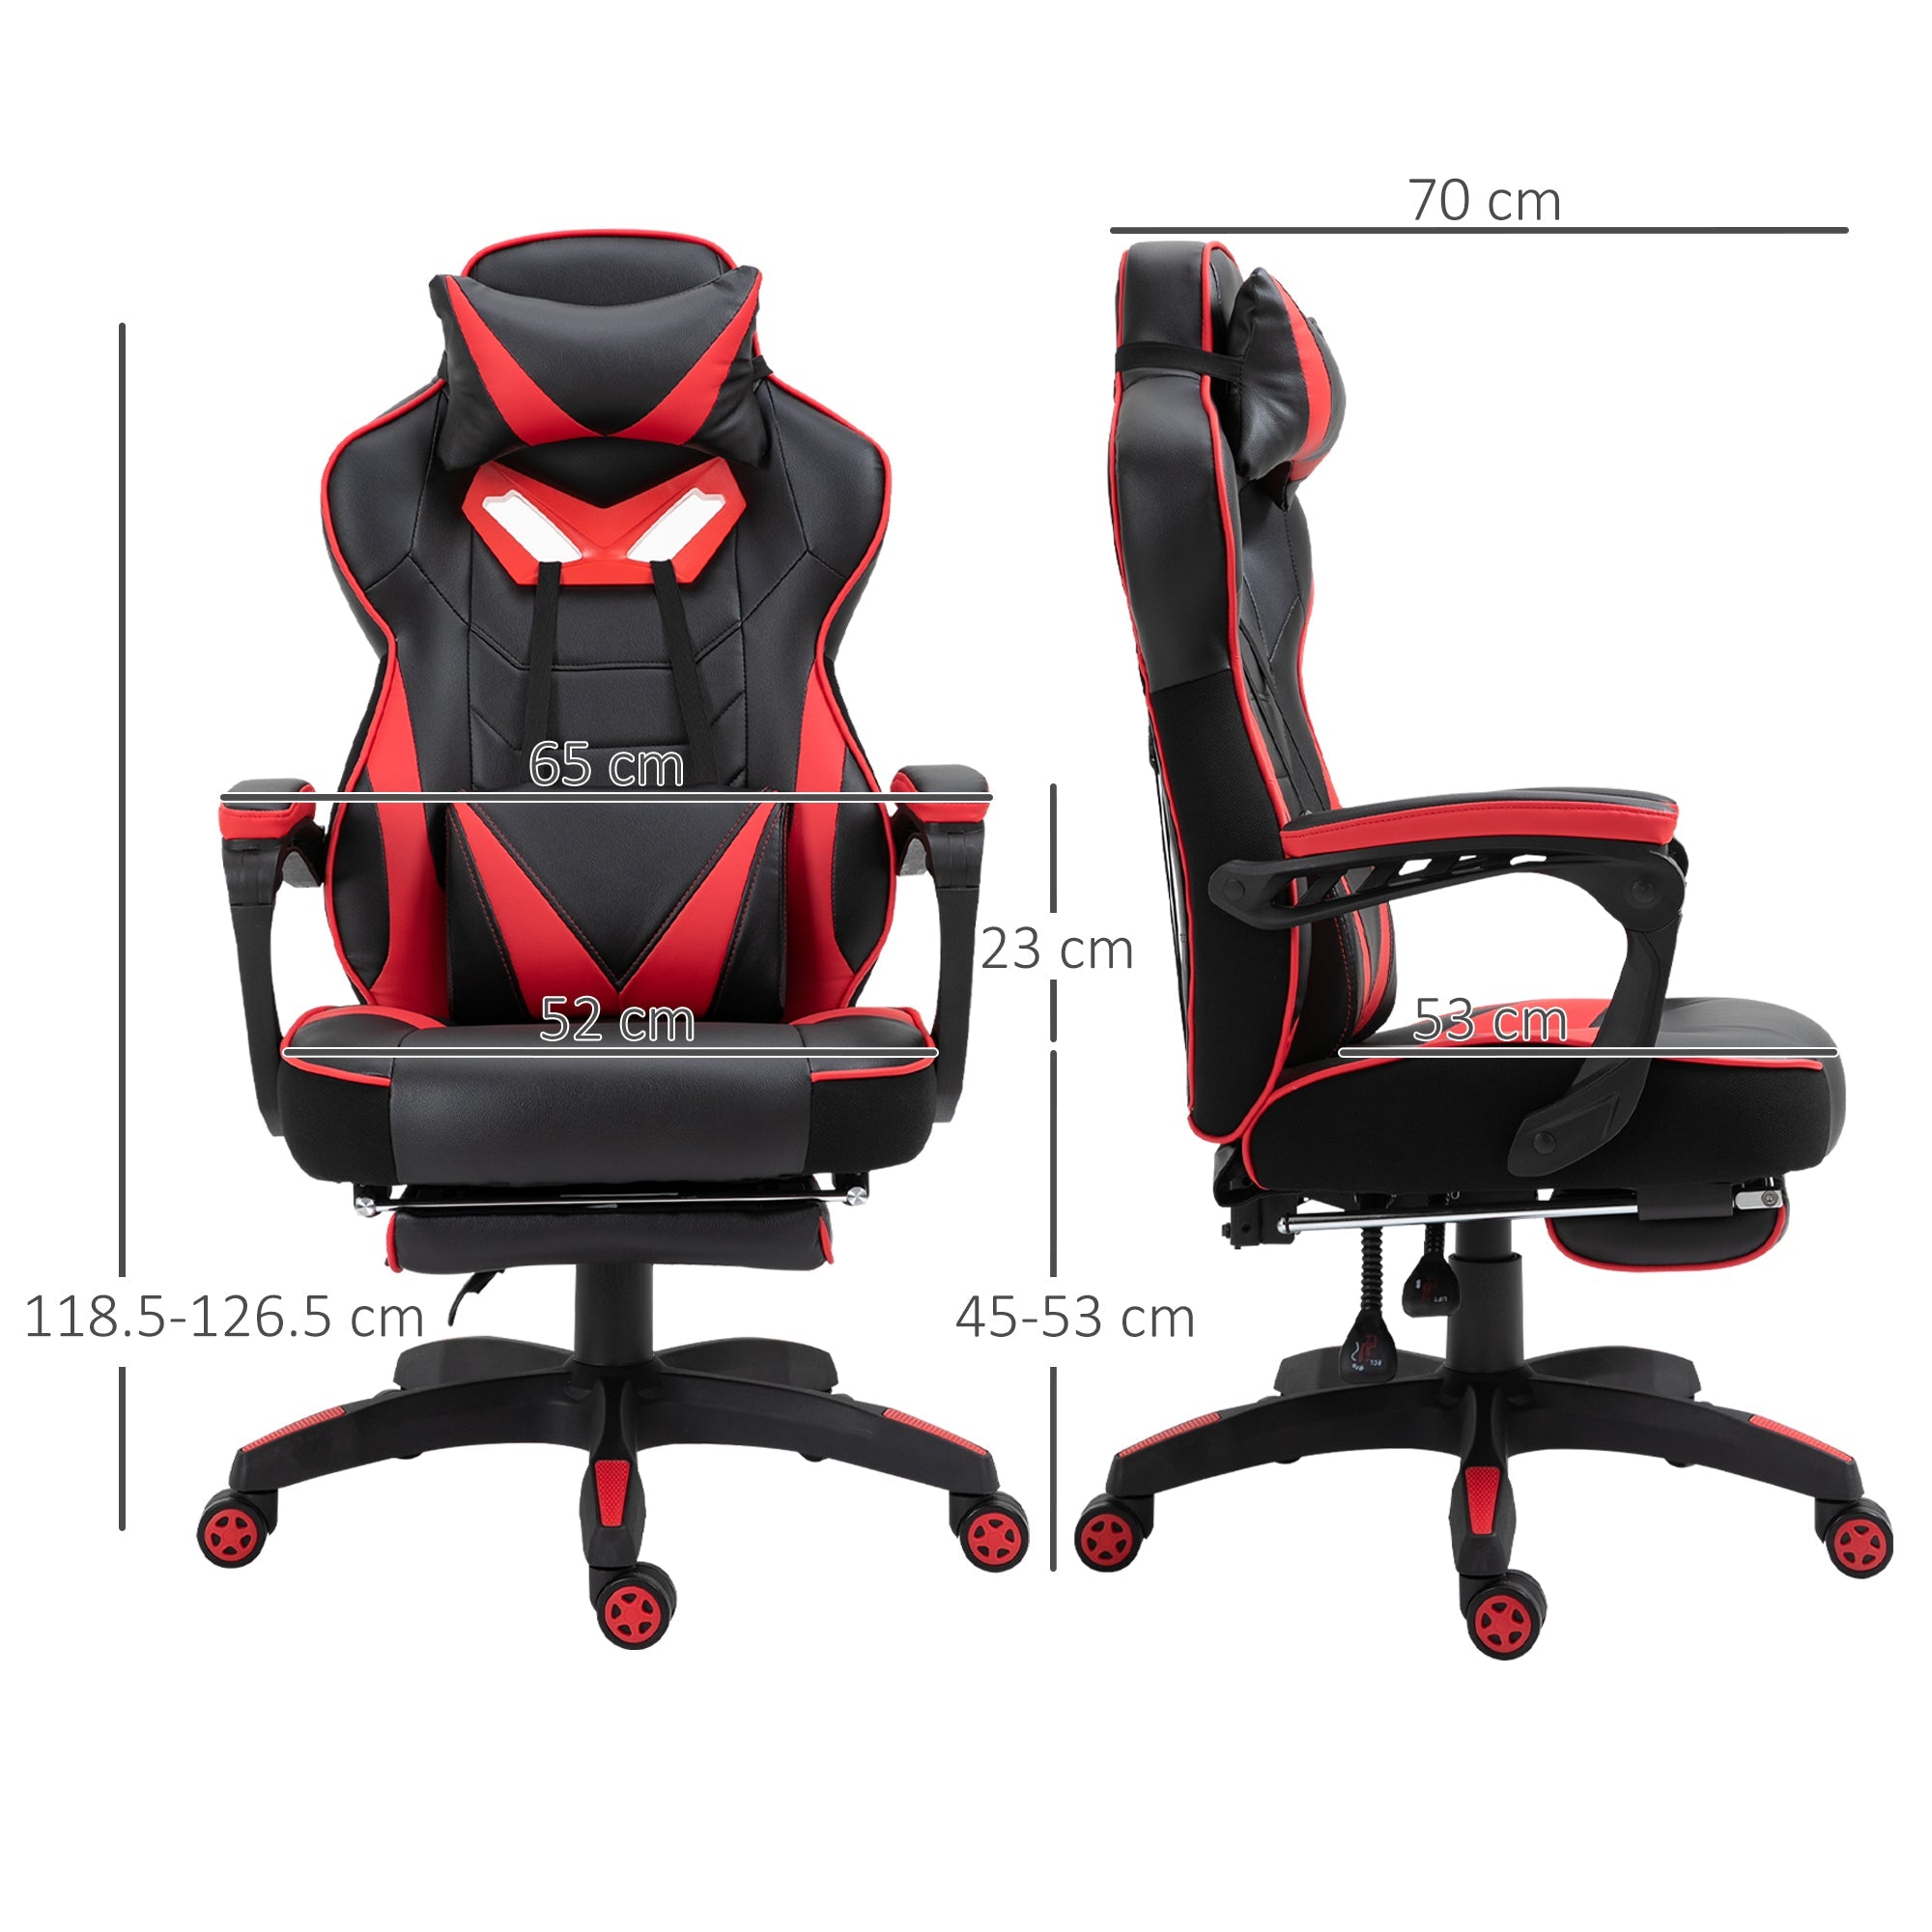 Ergonomic Racing Gaming Chair Office Desk Chair Adjustable Height Recliner with Wheels, Headrest, Lumbar Support, Retractable Footrest, Red-2